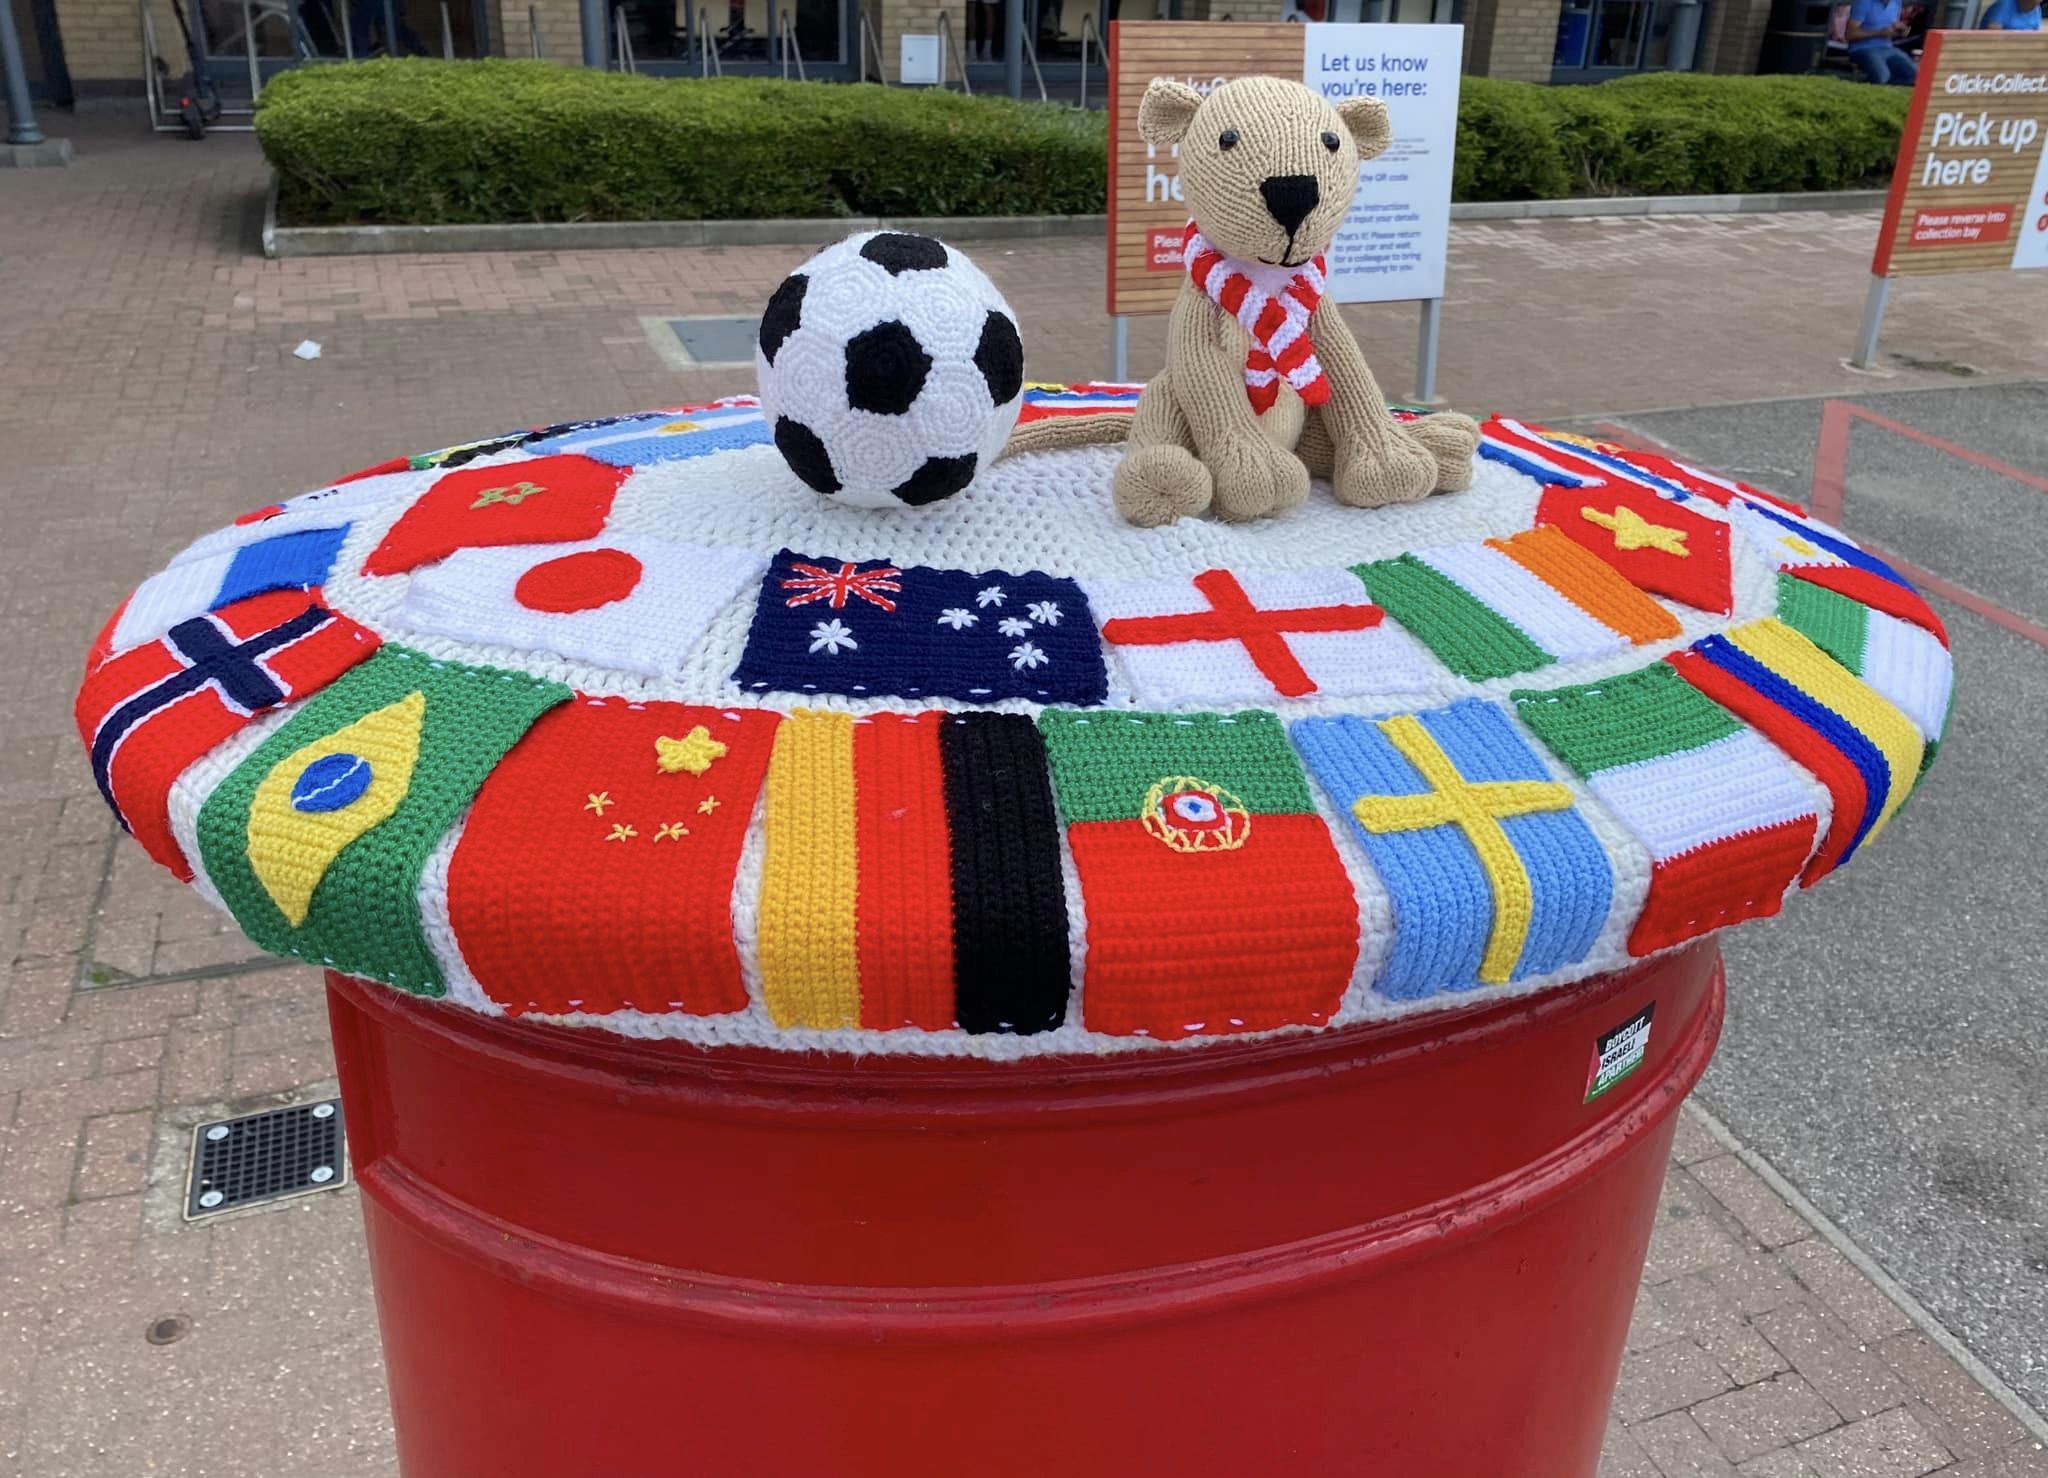 Post box topper world cup